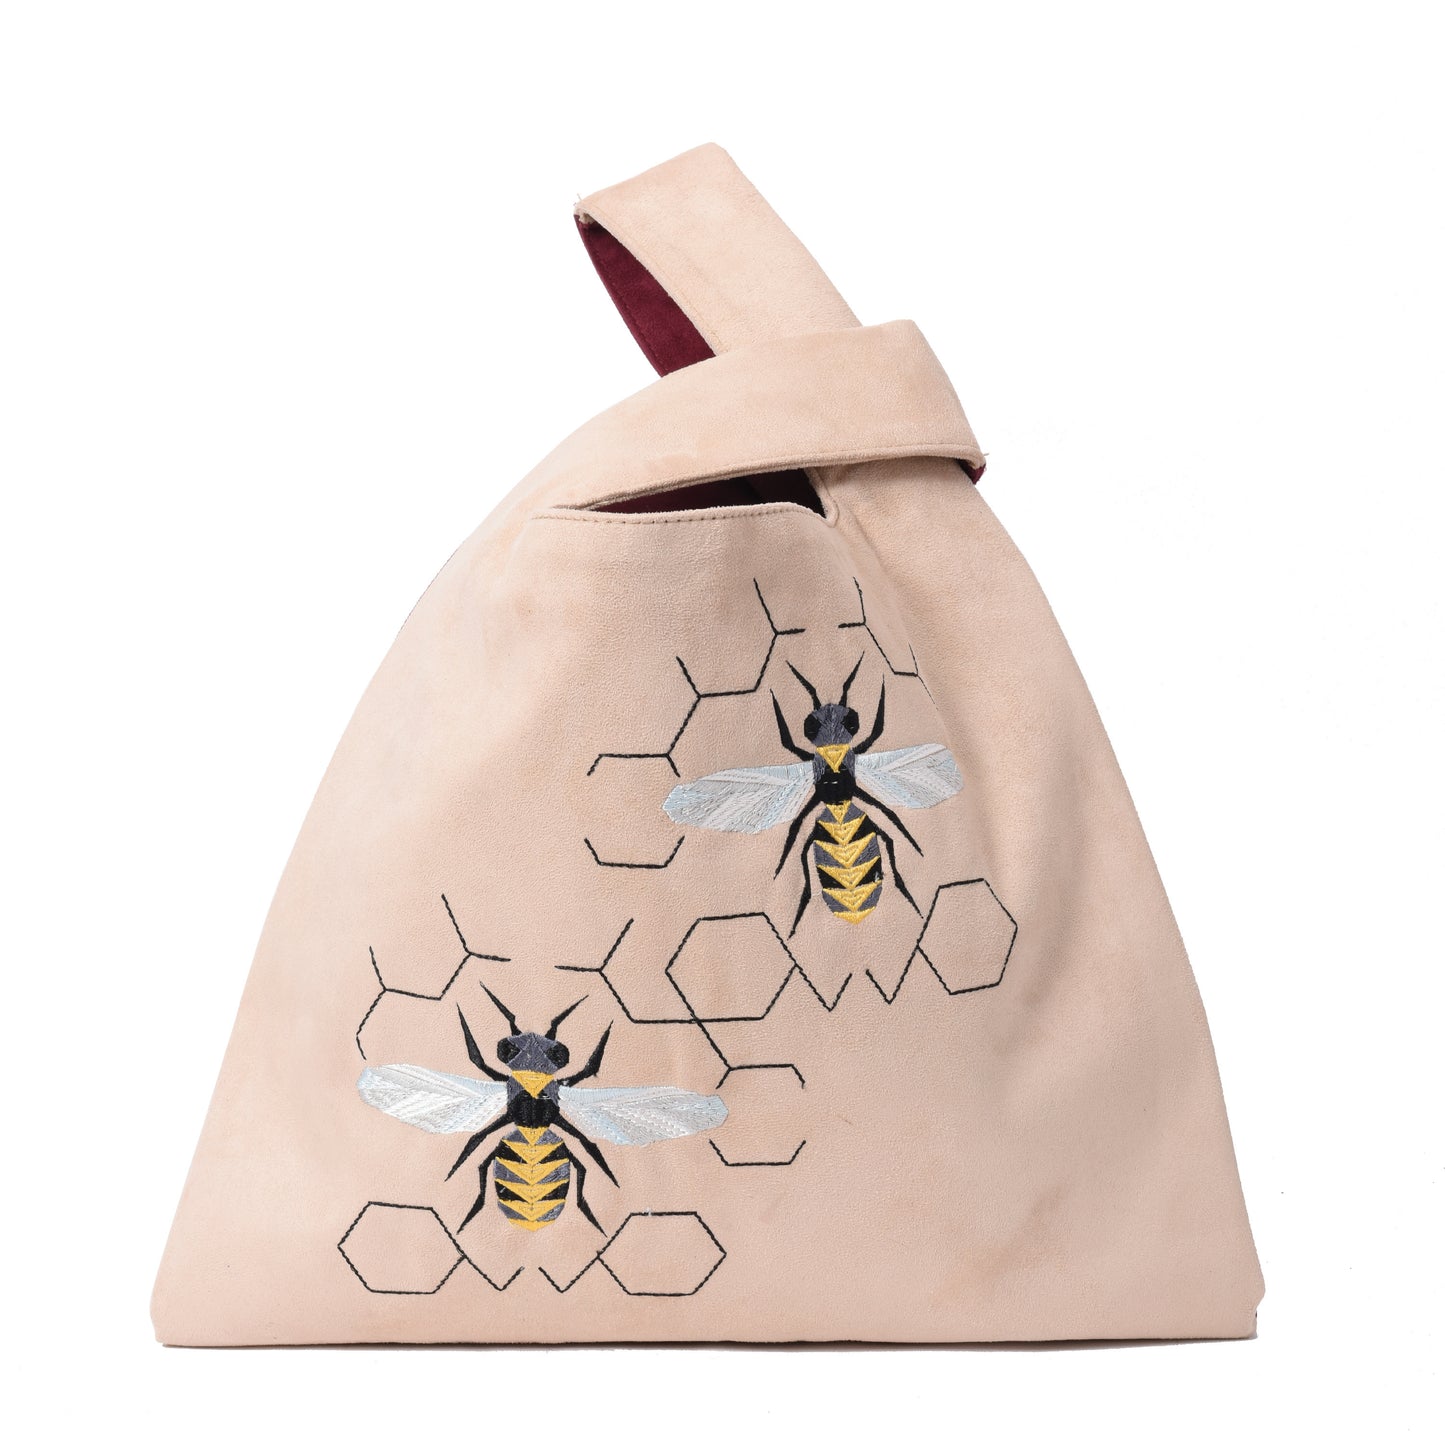 Knot Beige/burgundy Handbag with Bees embroidery - Code 920